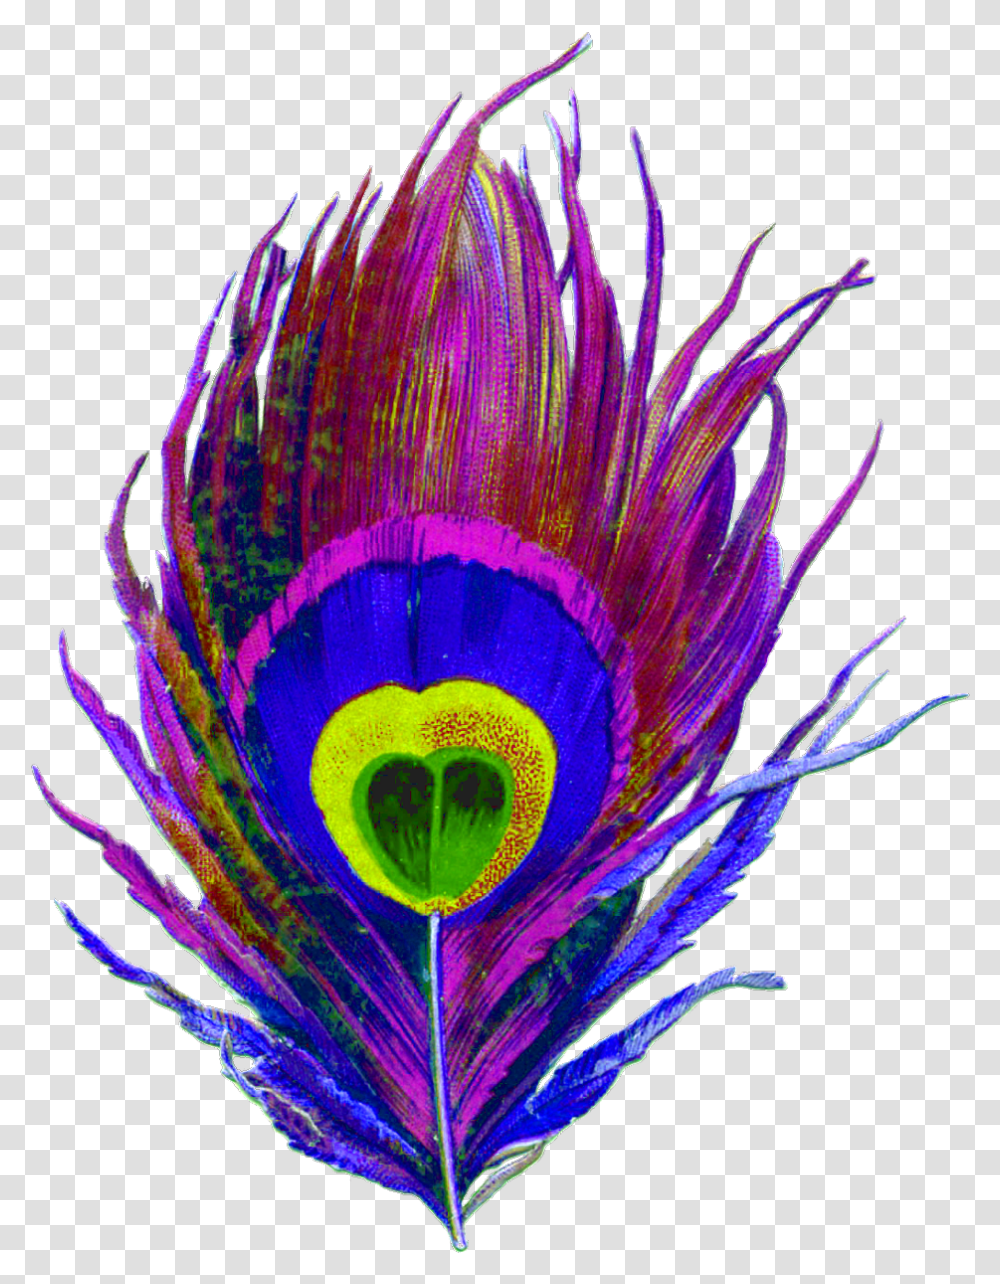 Feather Feathers Peacock Peacockfeather Peacockfeathers Drawing Of A Peacock Feather, Animal, Bird, Dye, Light Transparent Png